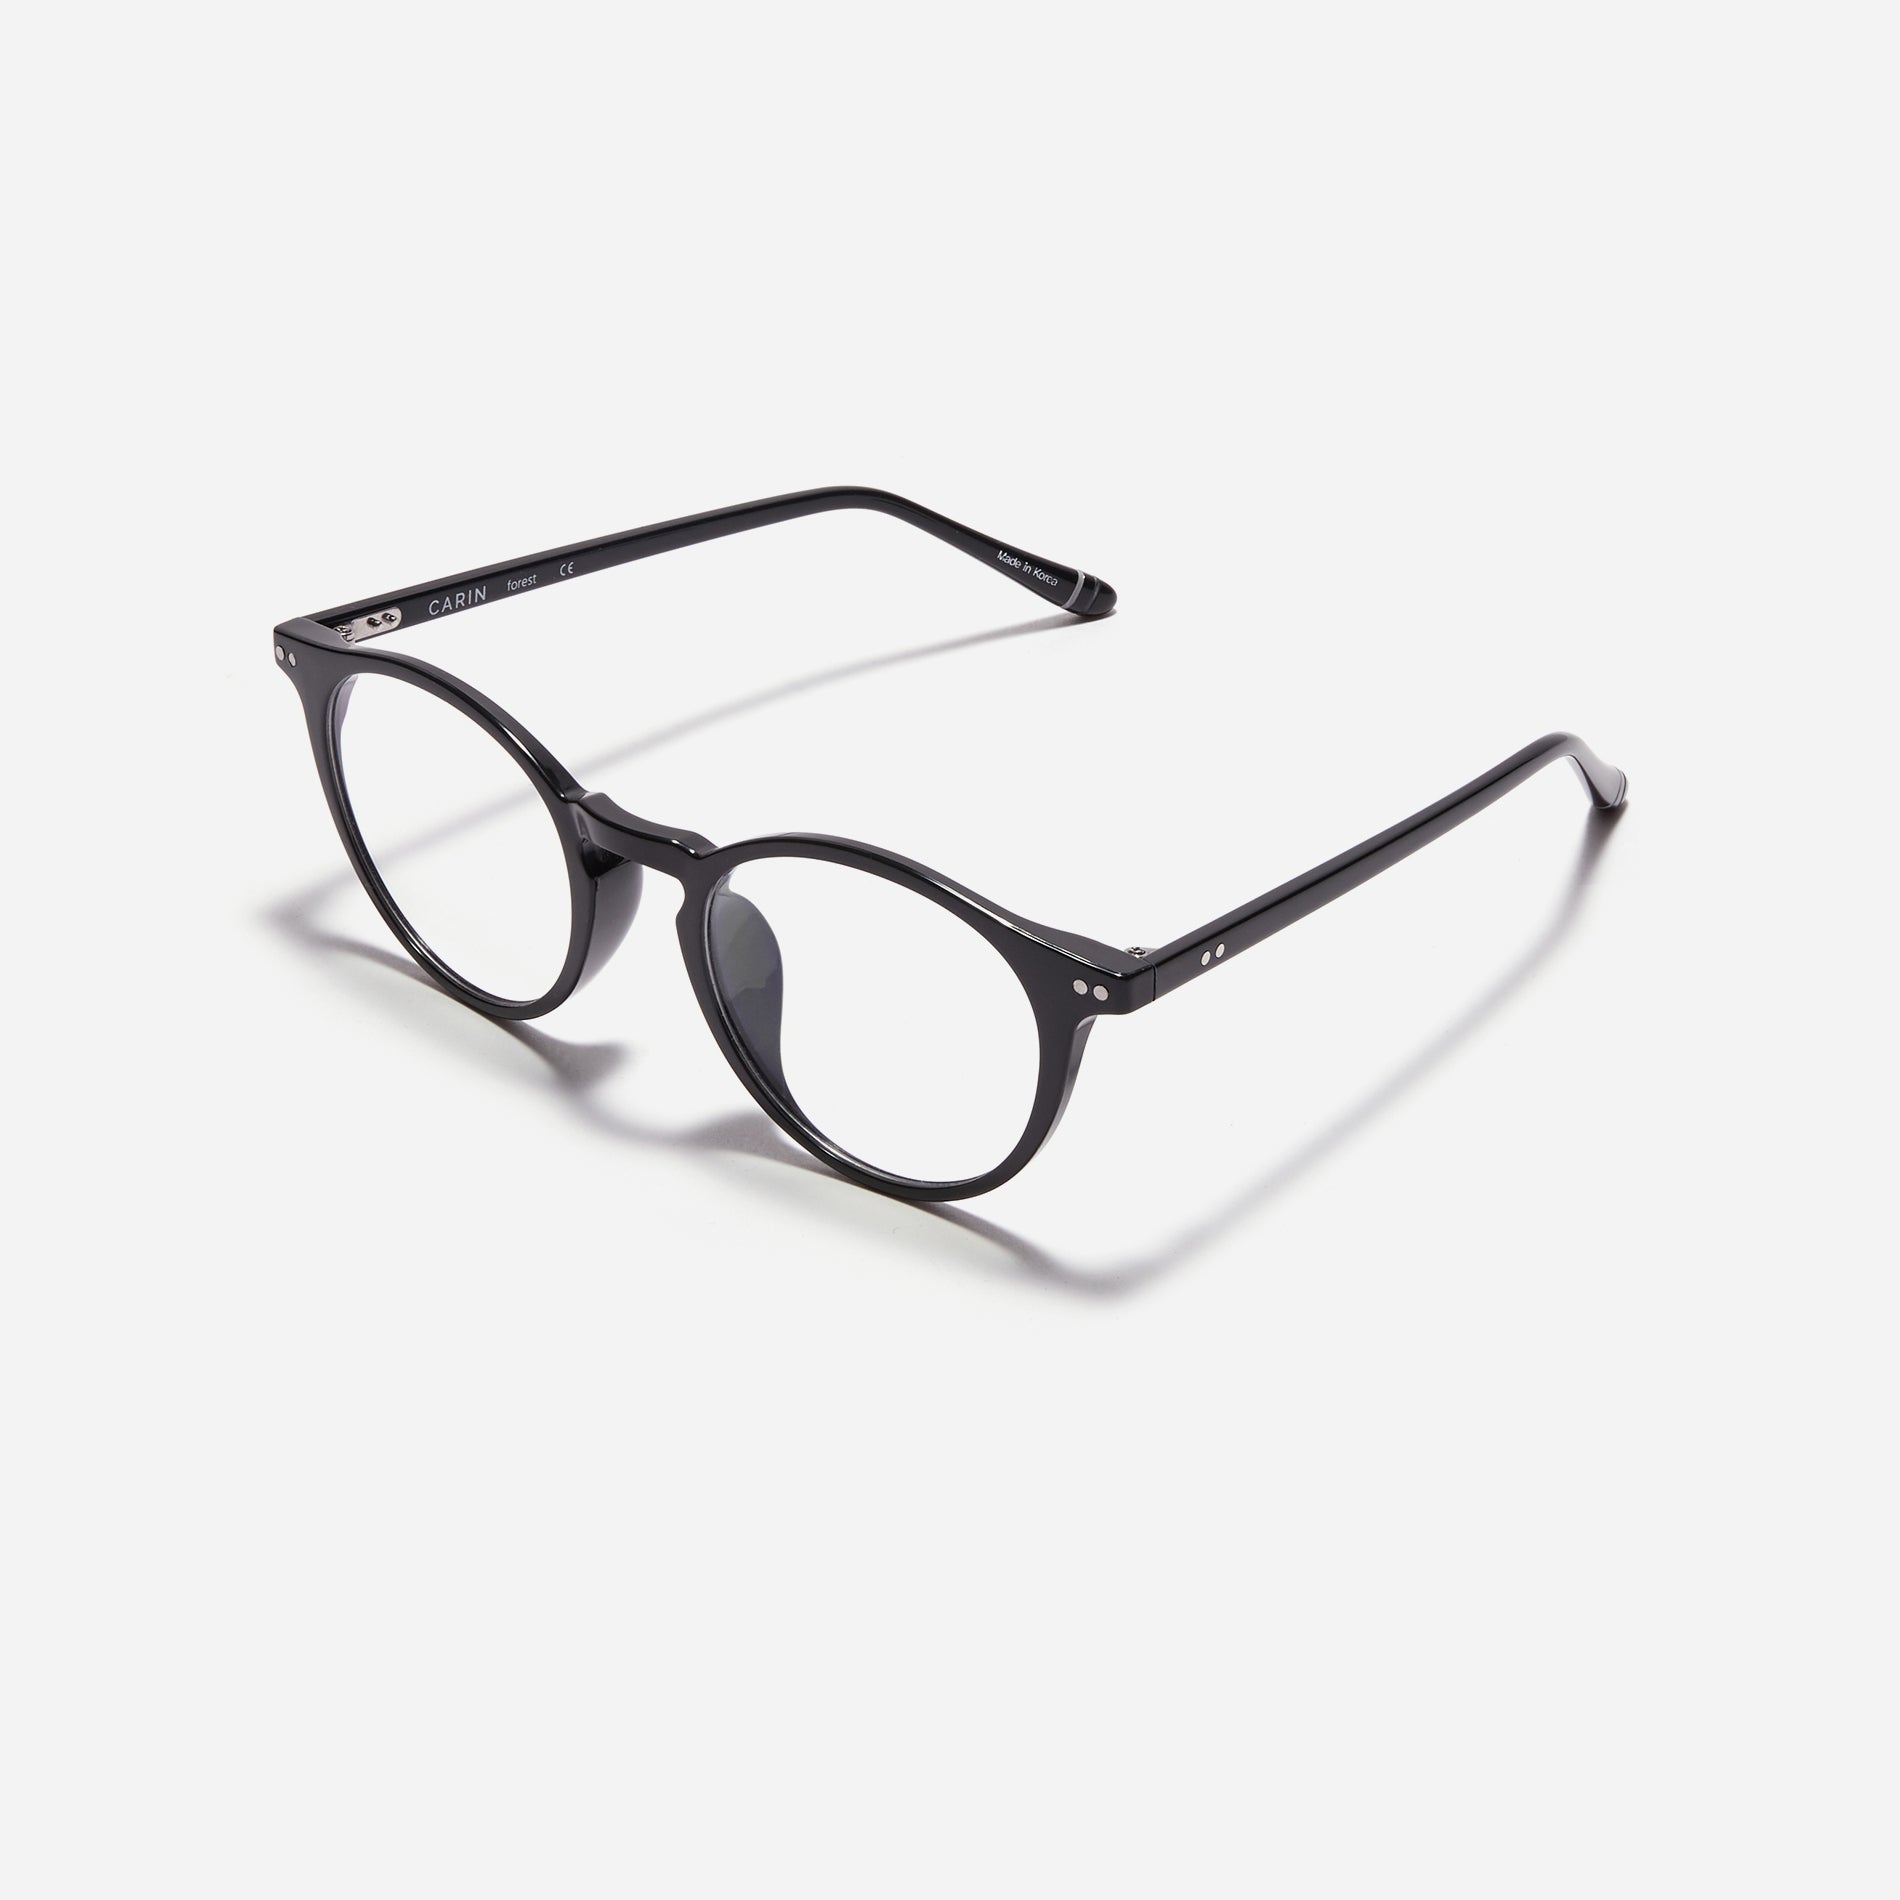 Round-shaped horn-rimmed eyeglasses featuring a sturdy and lightweight frame. Rena design incorporates dual lining on the tips to prevent slipping and ensure a consistently comfortable wearing experience.